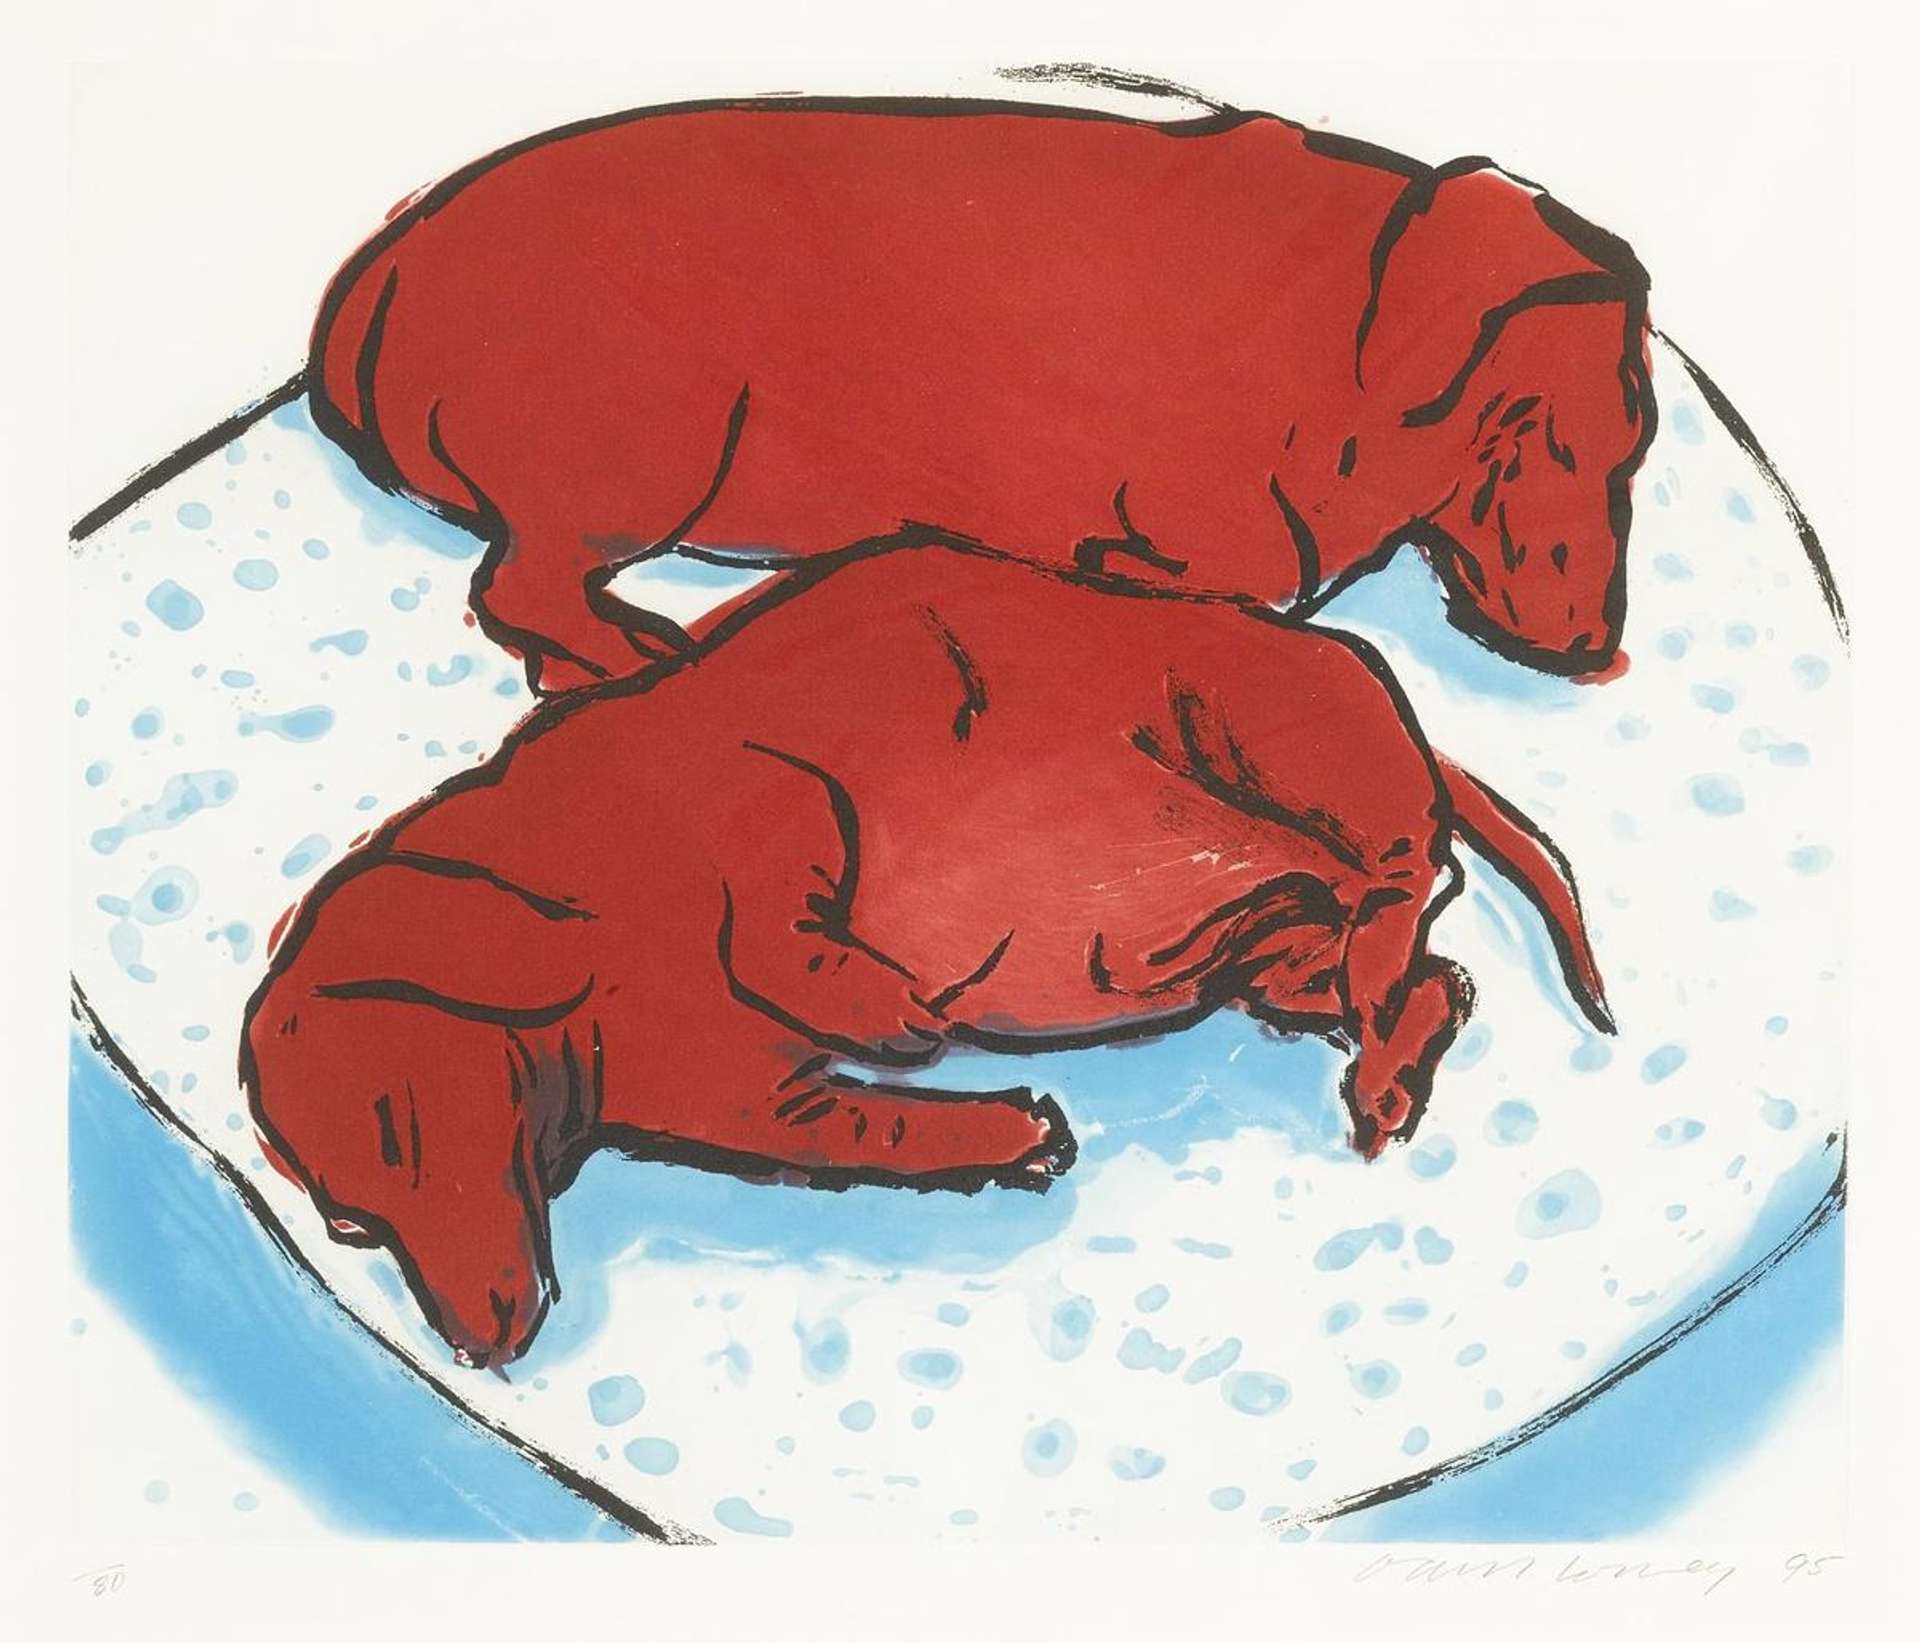 A colourful print of David Hockney's two dogs, lying horizontally on the same bed. The dogs are rendered in bright red.